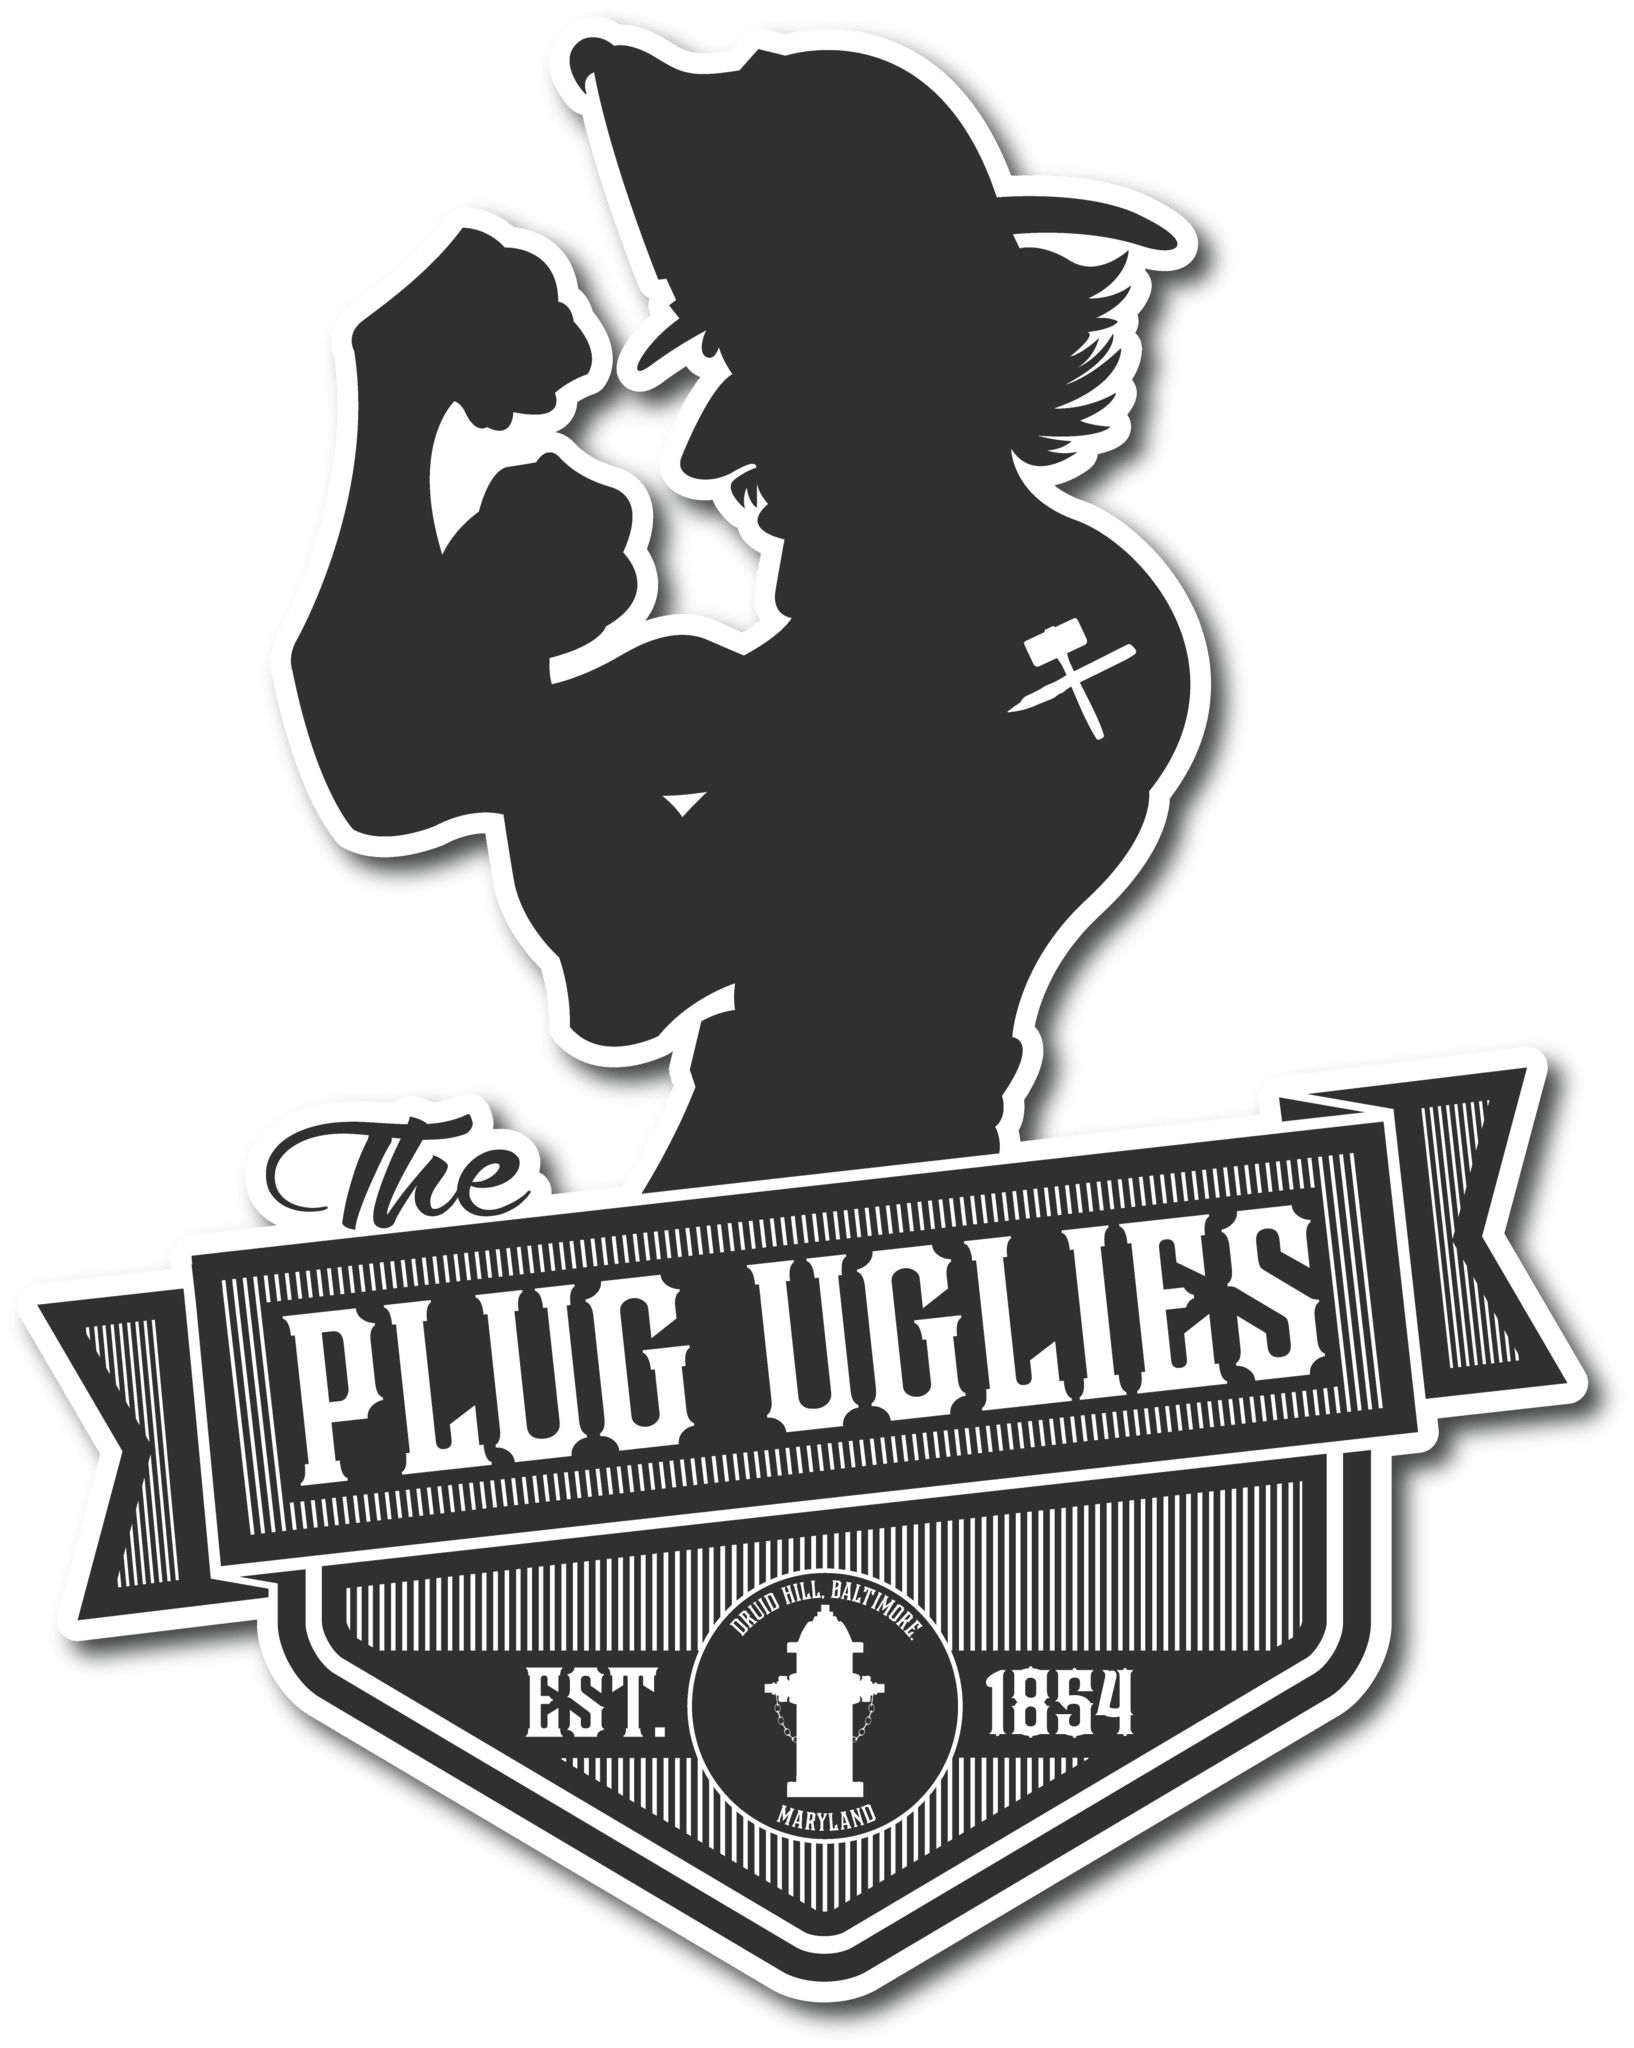 The Uglies Logo - Plug Uglies Decal. Fire fighters, equipment , and department patches